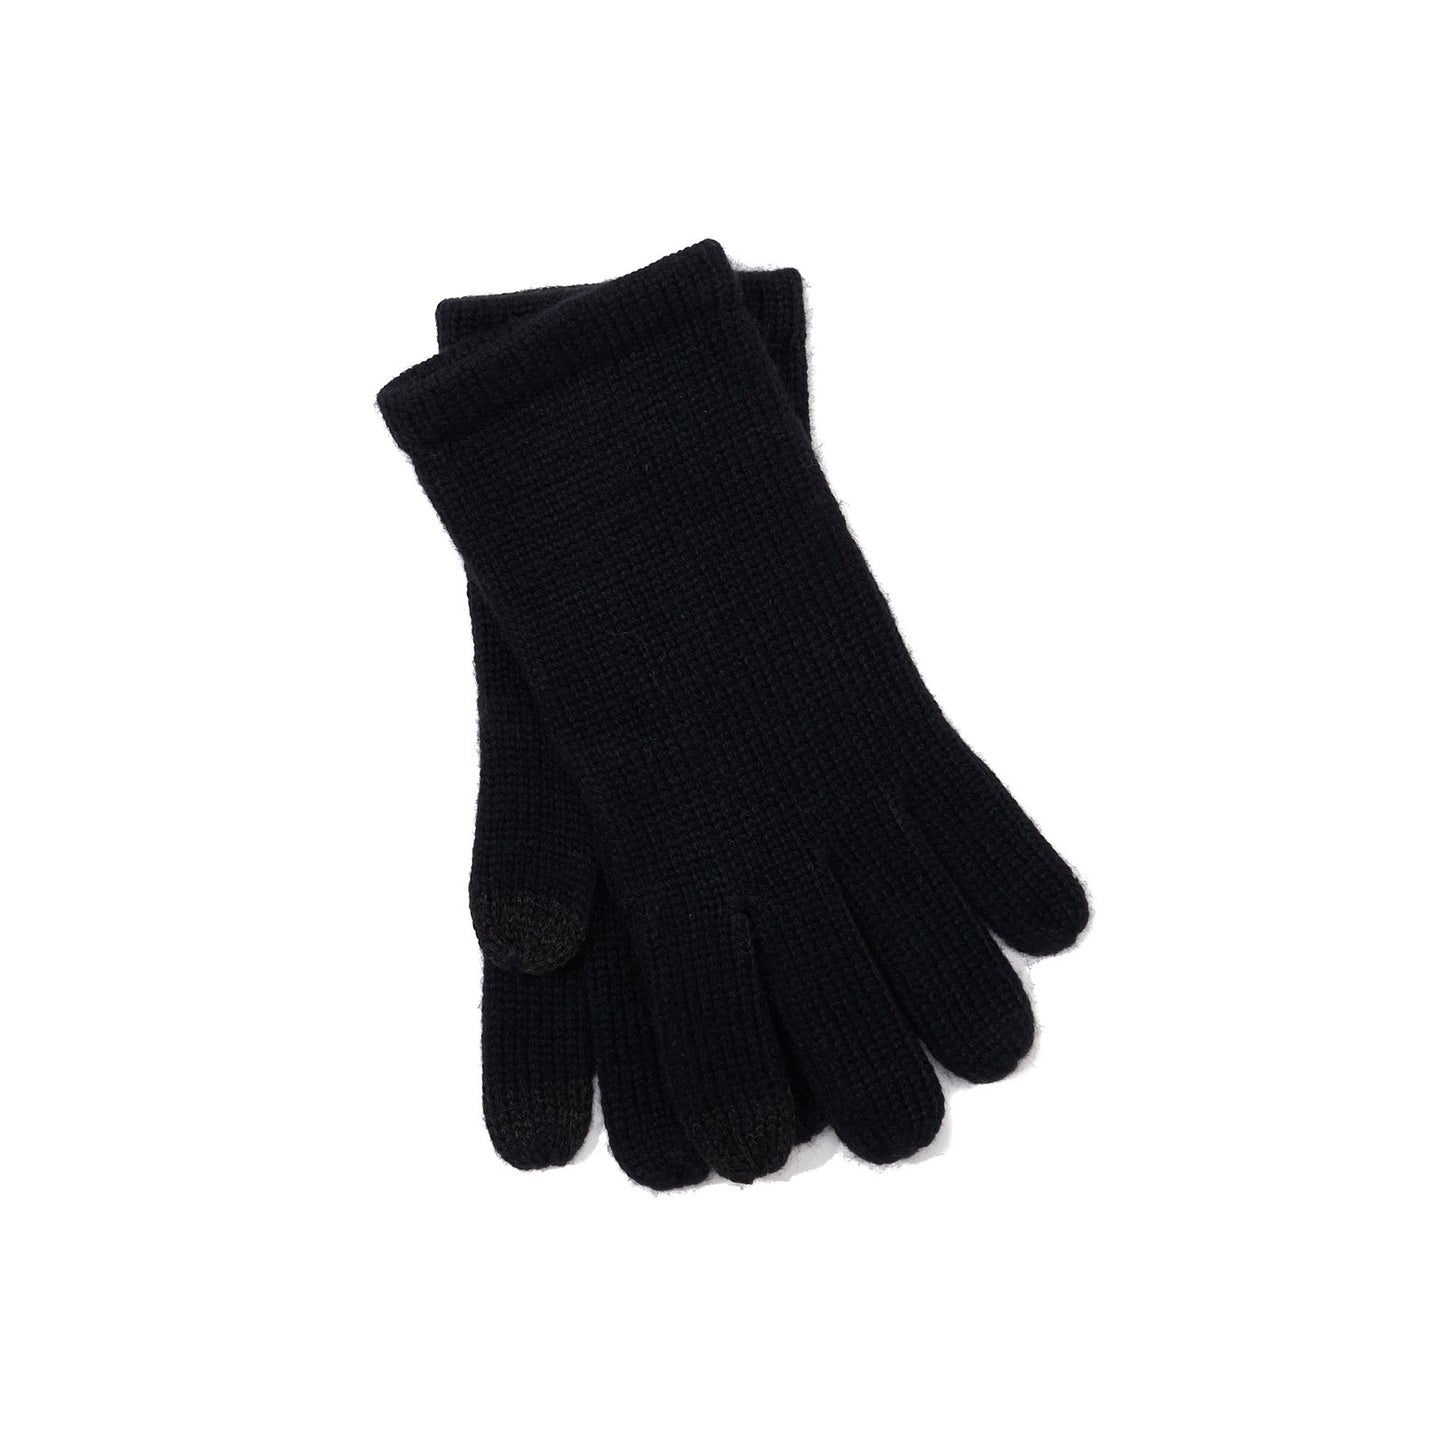 Recycled Touch Glove in Black